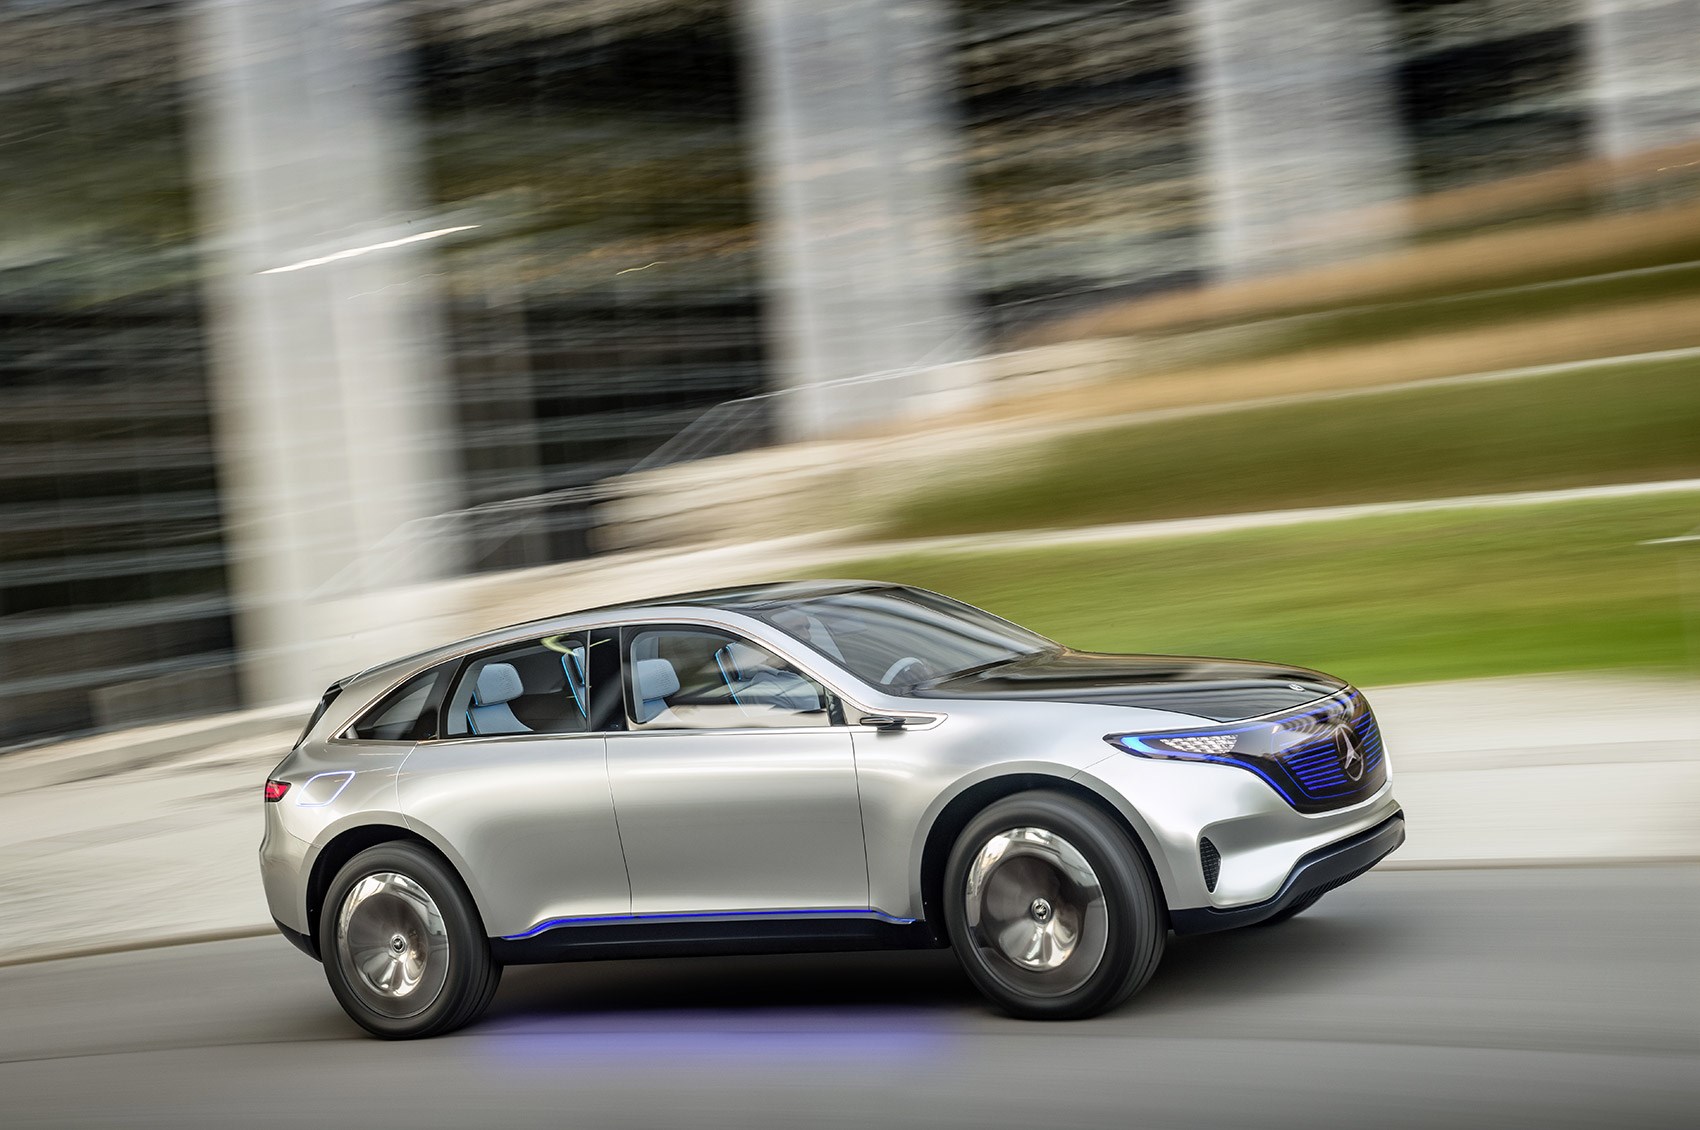 new mercedes amg electric sports crossover at 2016 paris motor show